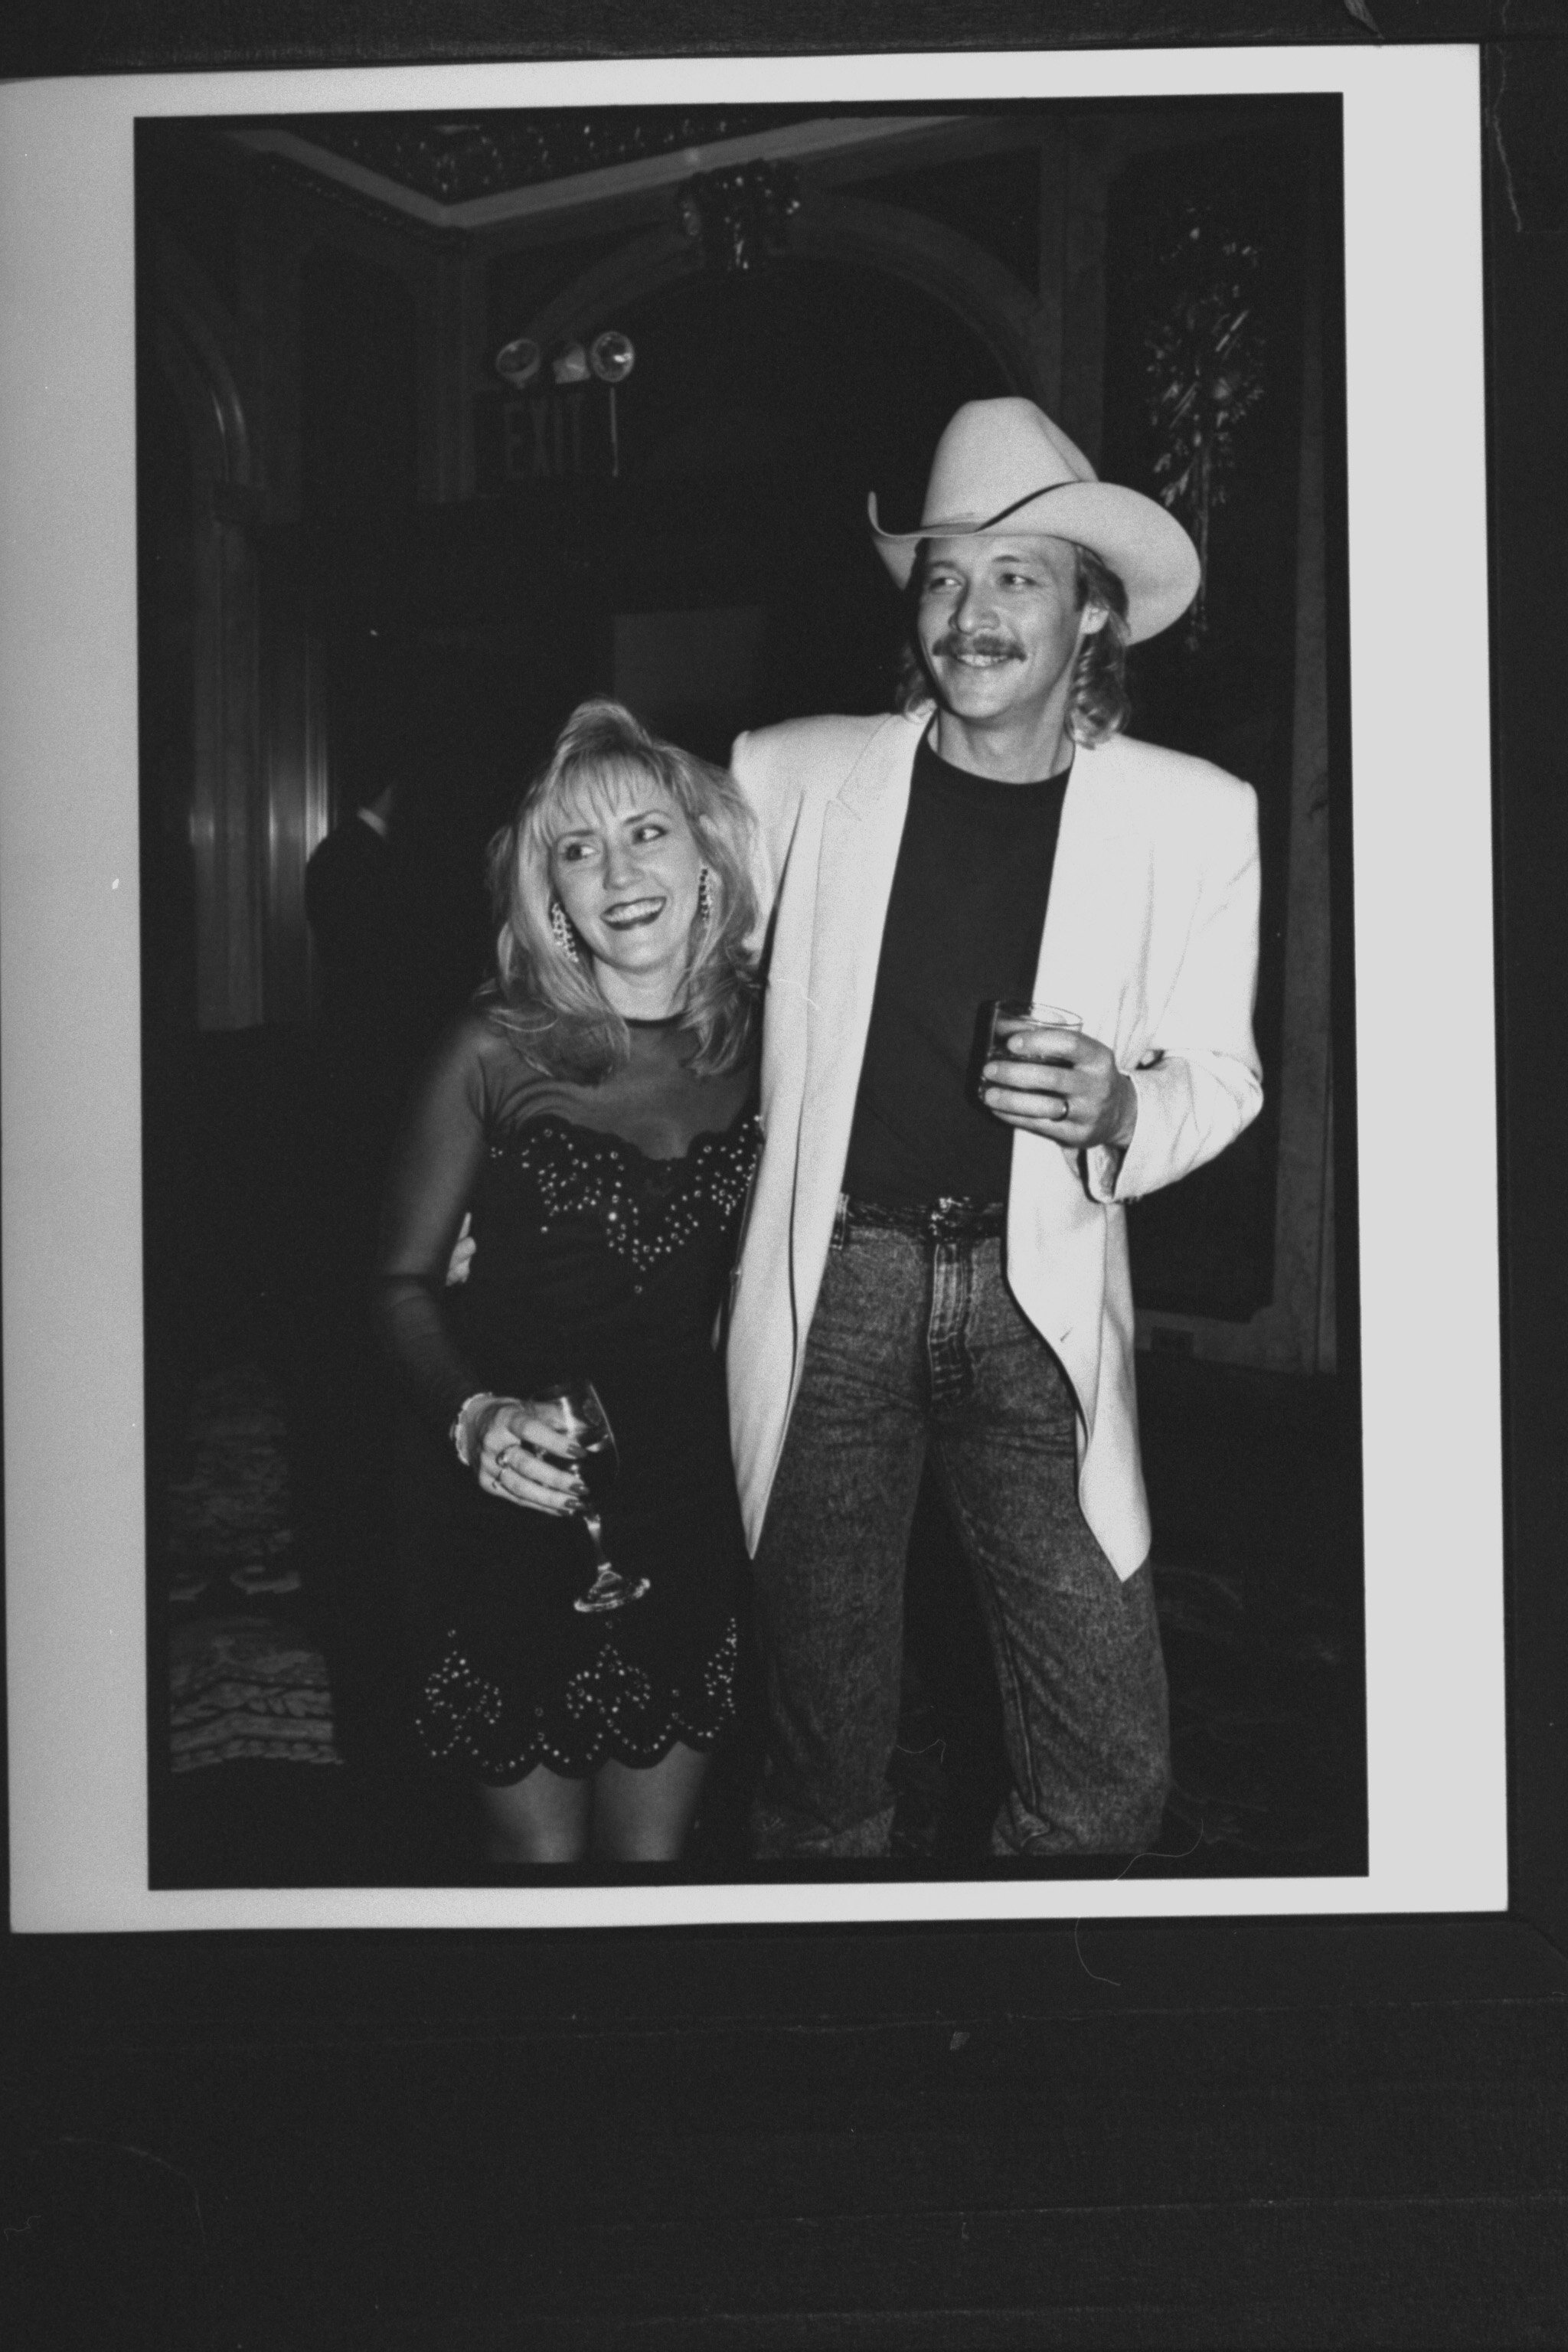 Denise and Alan Jackson at a Grammy Awards ceremony on February 25, 1992 | Source: Getty Images